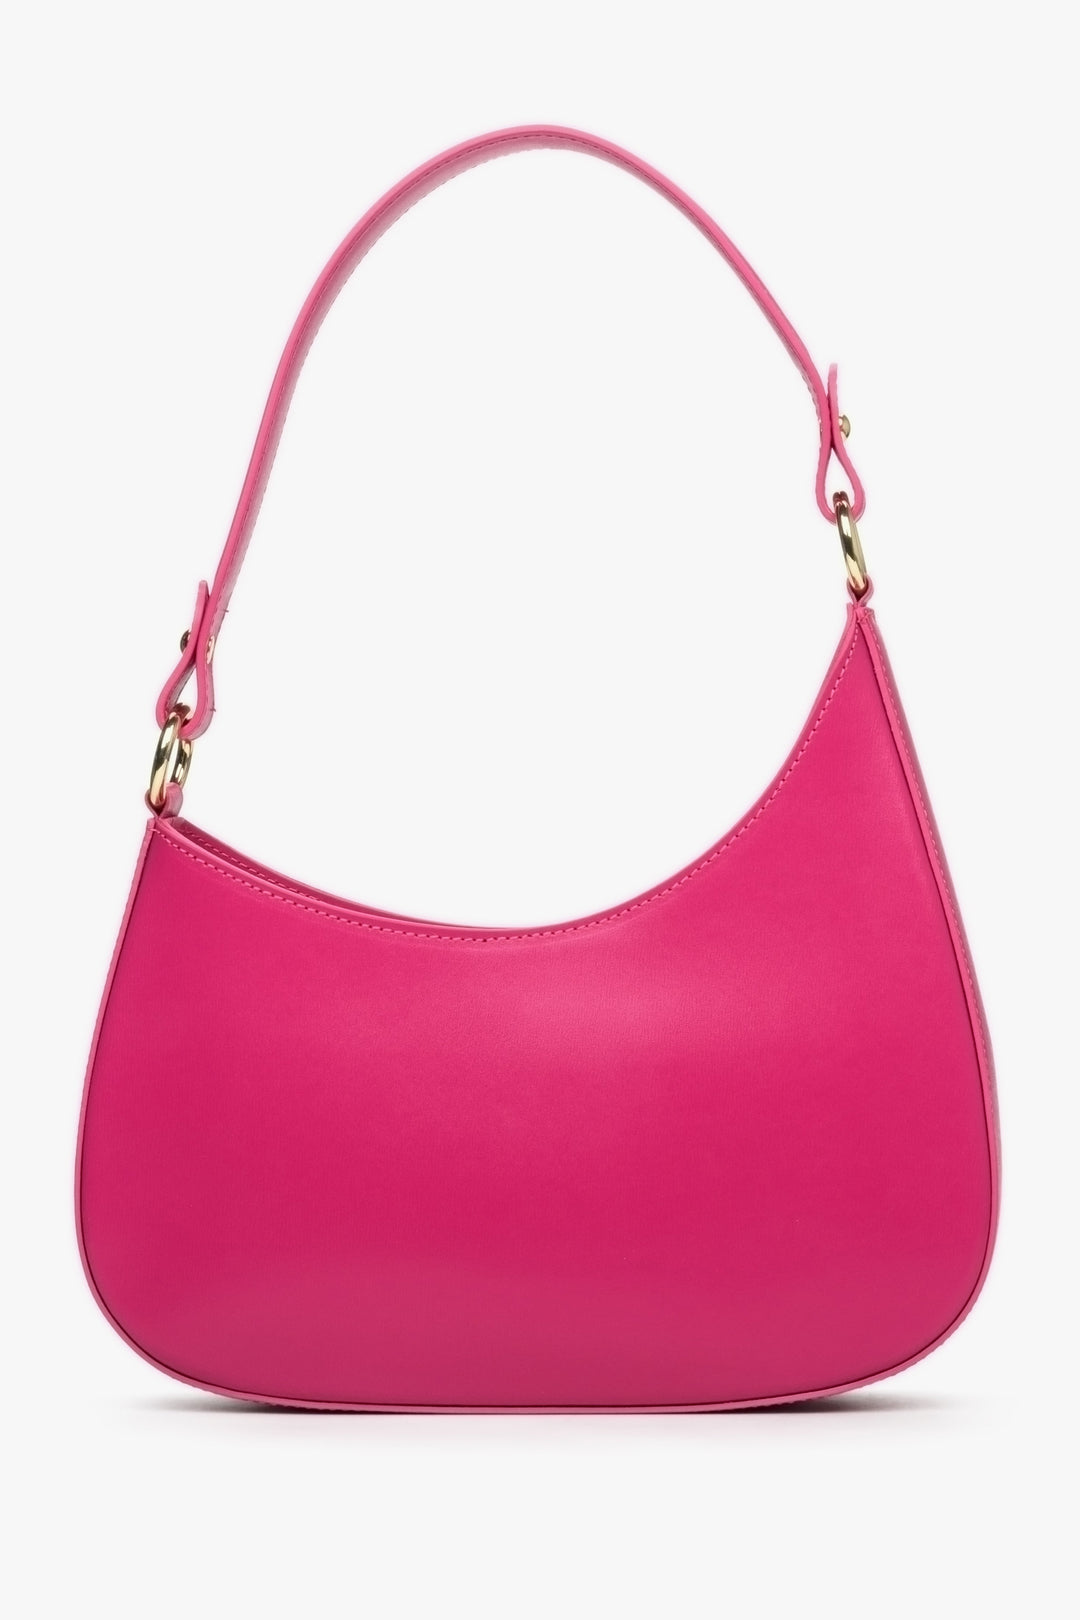 Estro women's handbag in pink natural leather sewn in Italy.